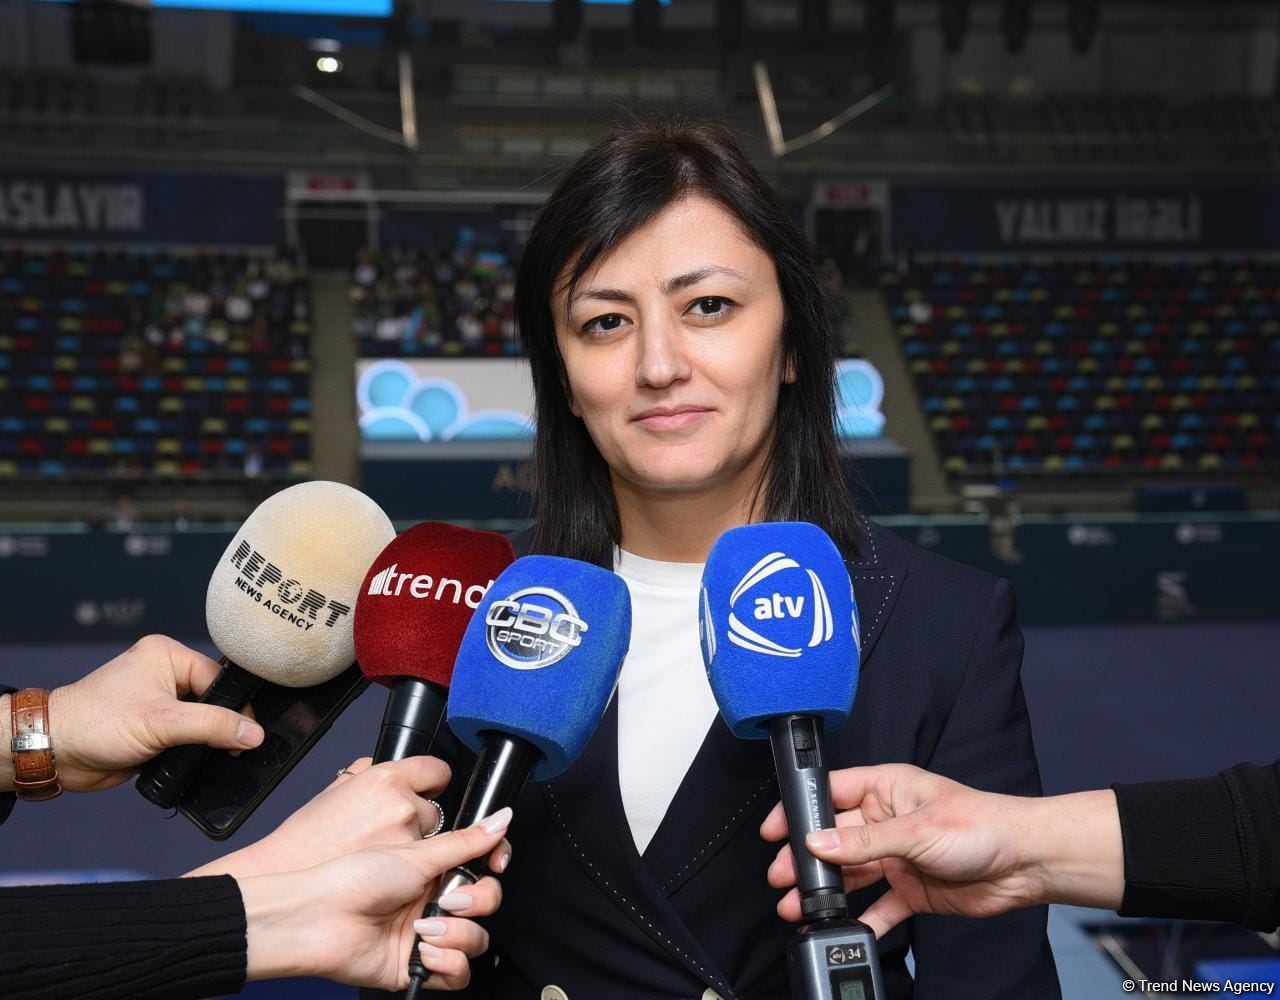 Level of competitions in Azerbaijan captivates representatives from around world – AGF